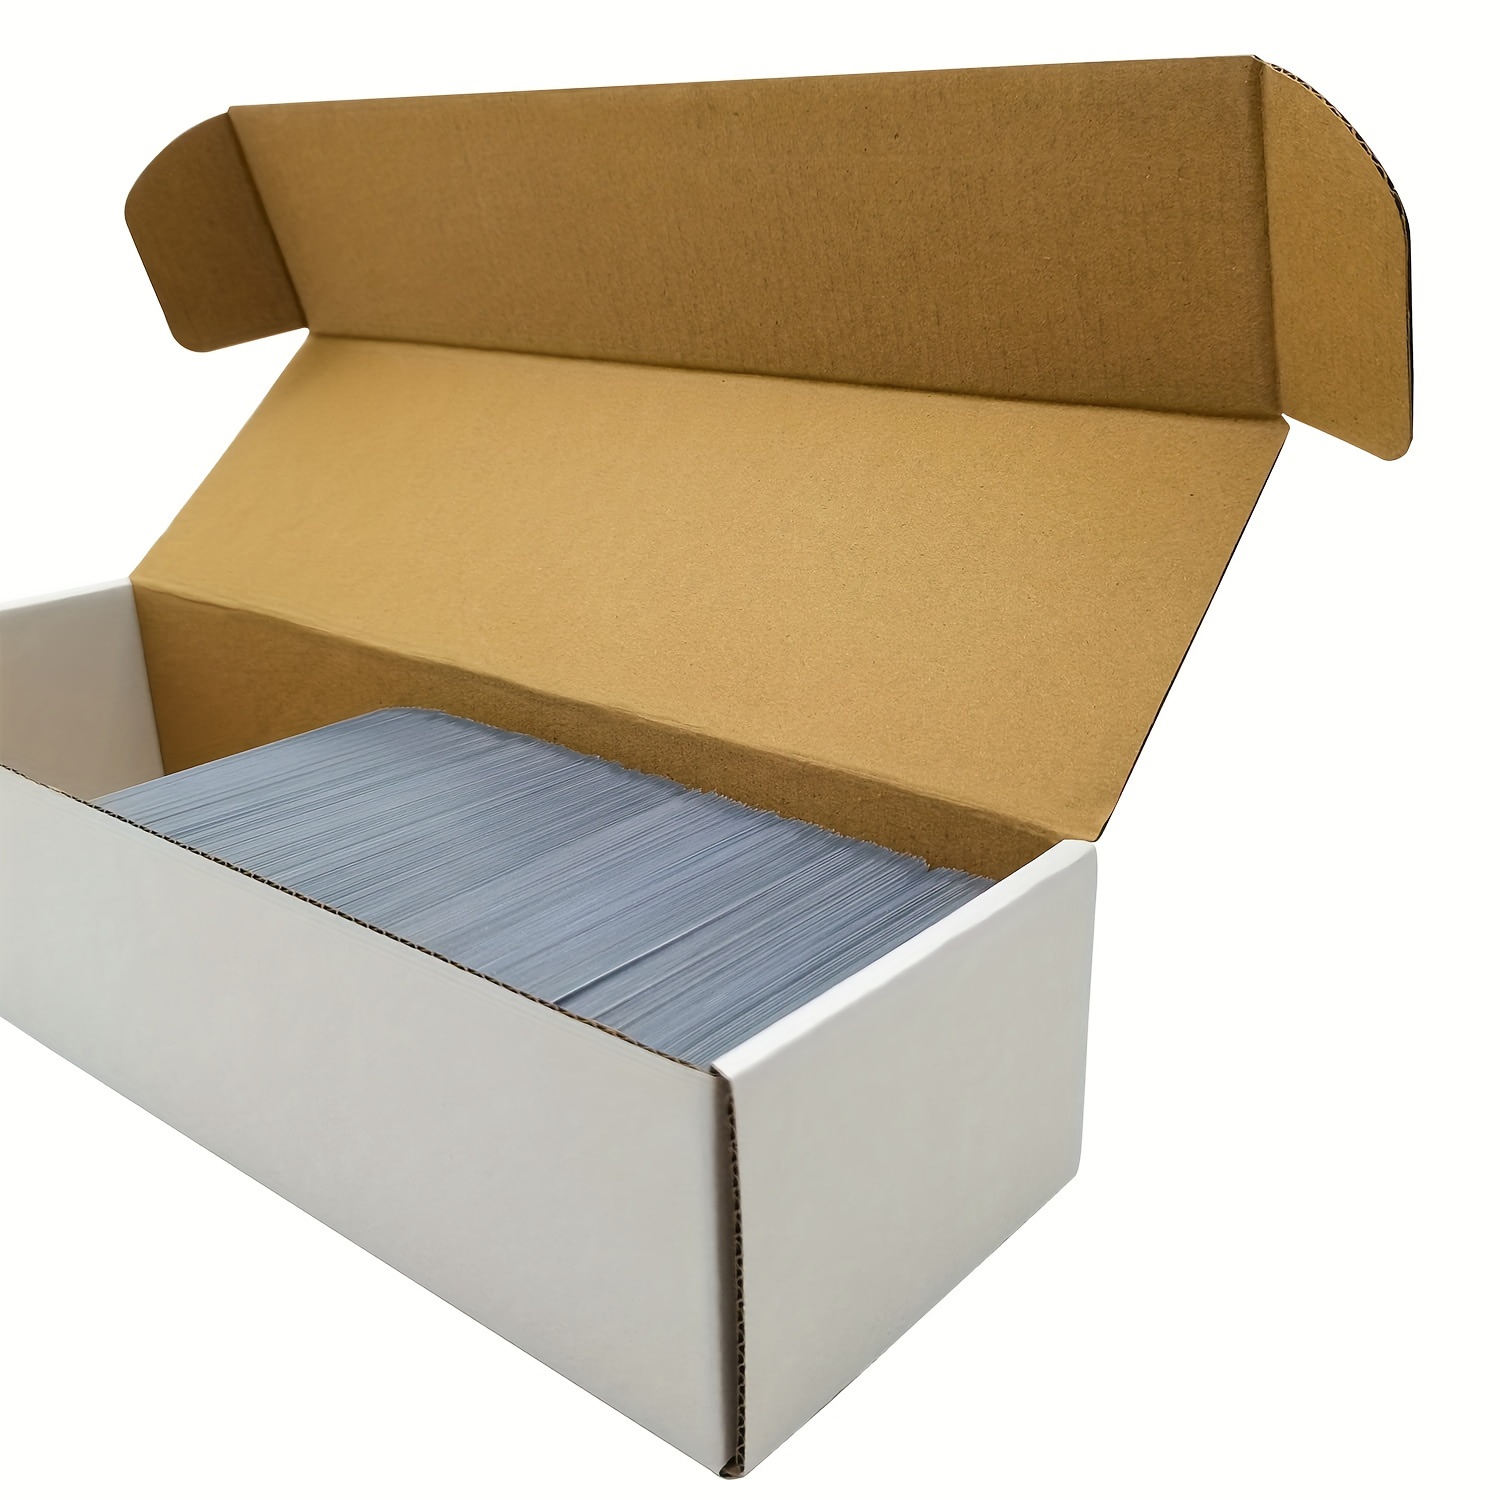 800 Count Card Box